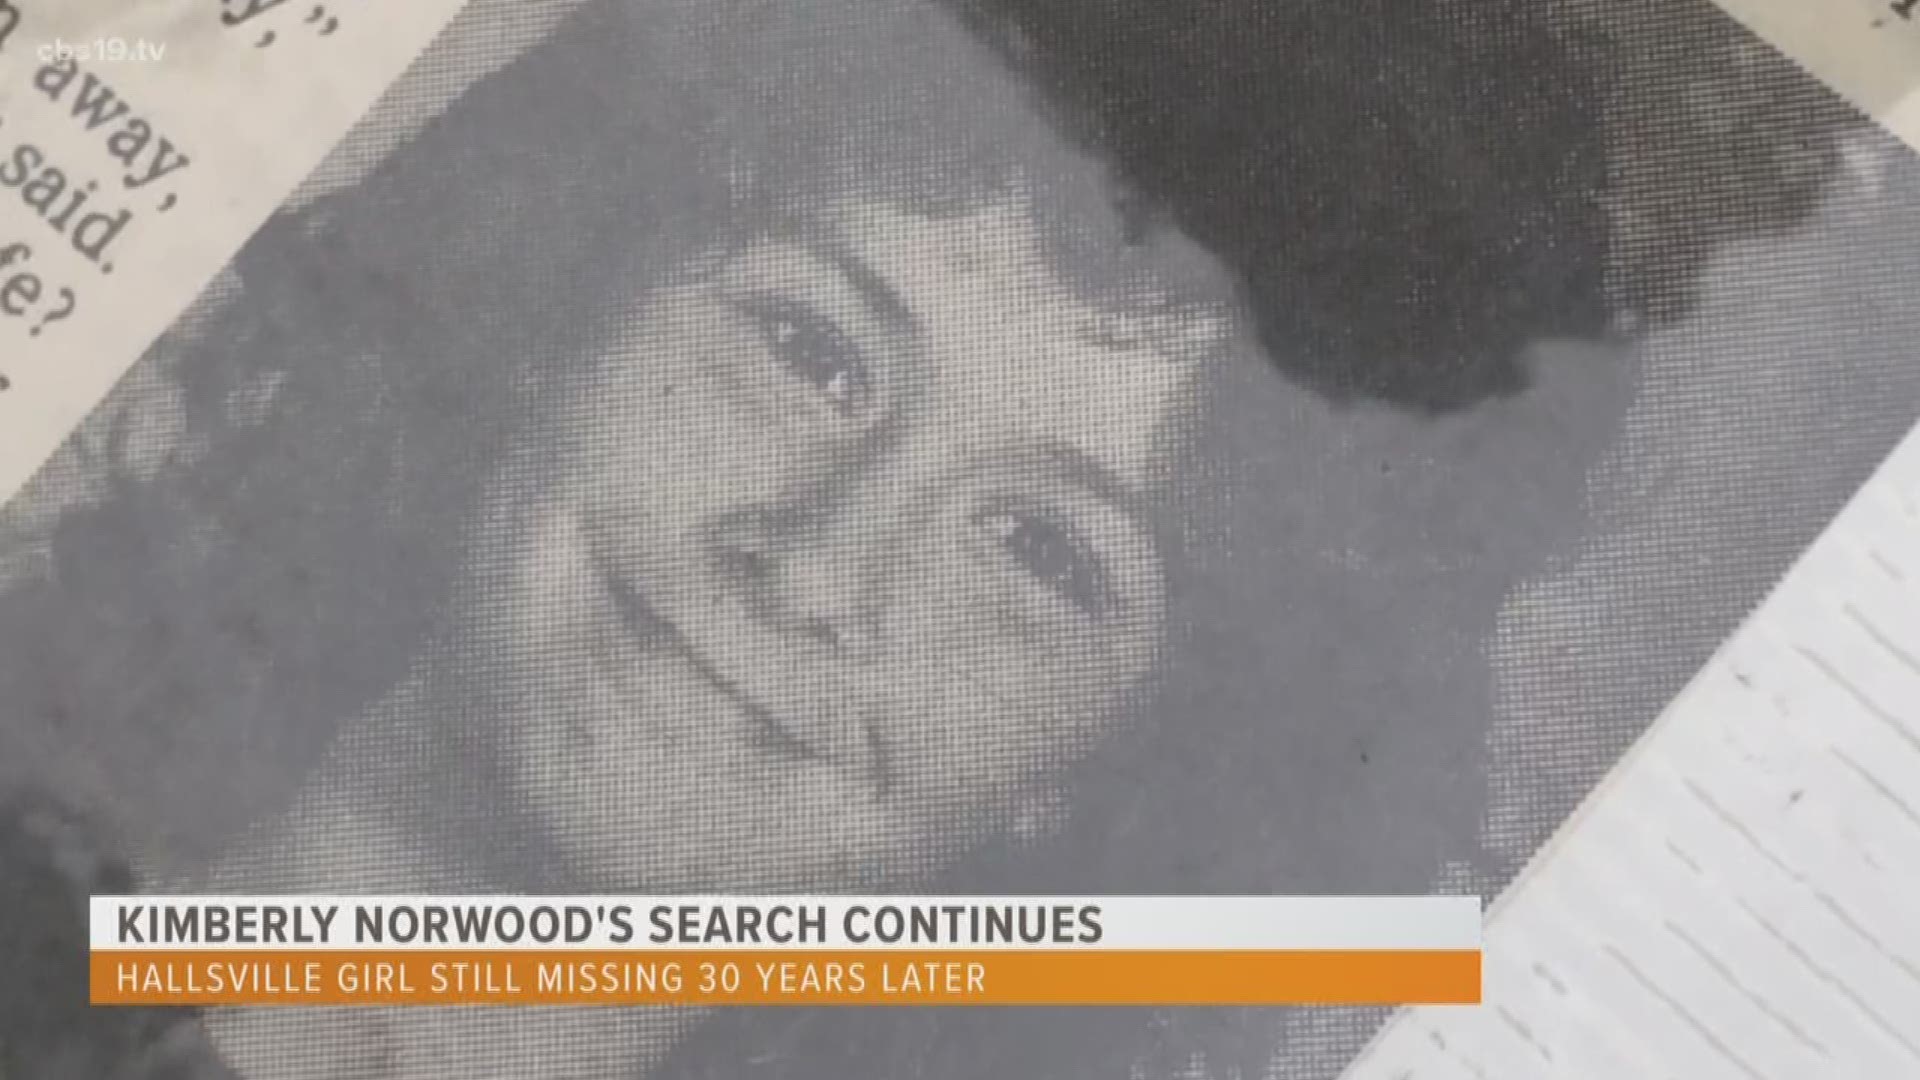 Three decades later and the search still continues. 
It's been thirty years since twelve year old Kimberly Norwood went missing near her home in Hallsville. 
Her mother Janice Norwood, is working to bring her story back to light, with hopes of finding her daughter.